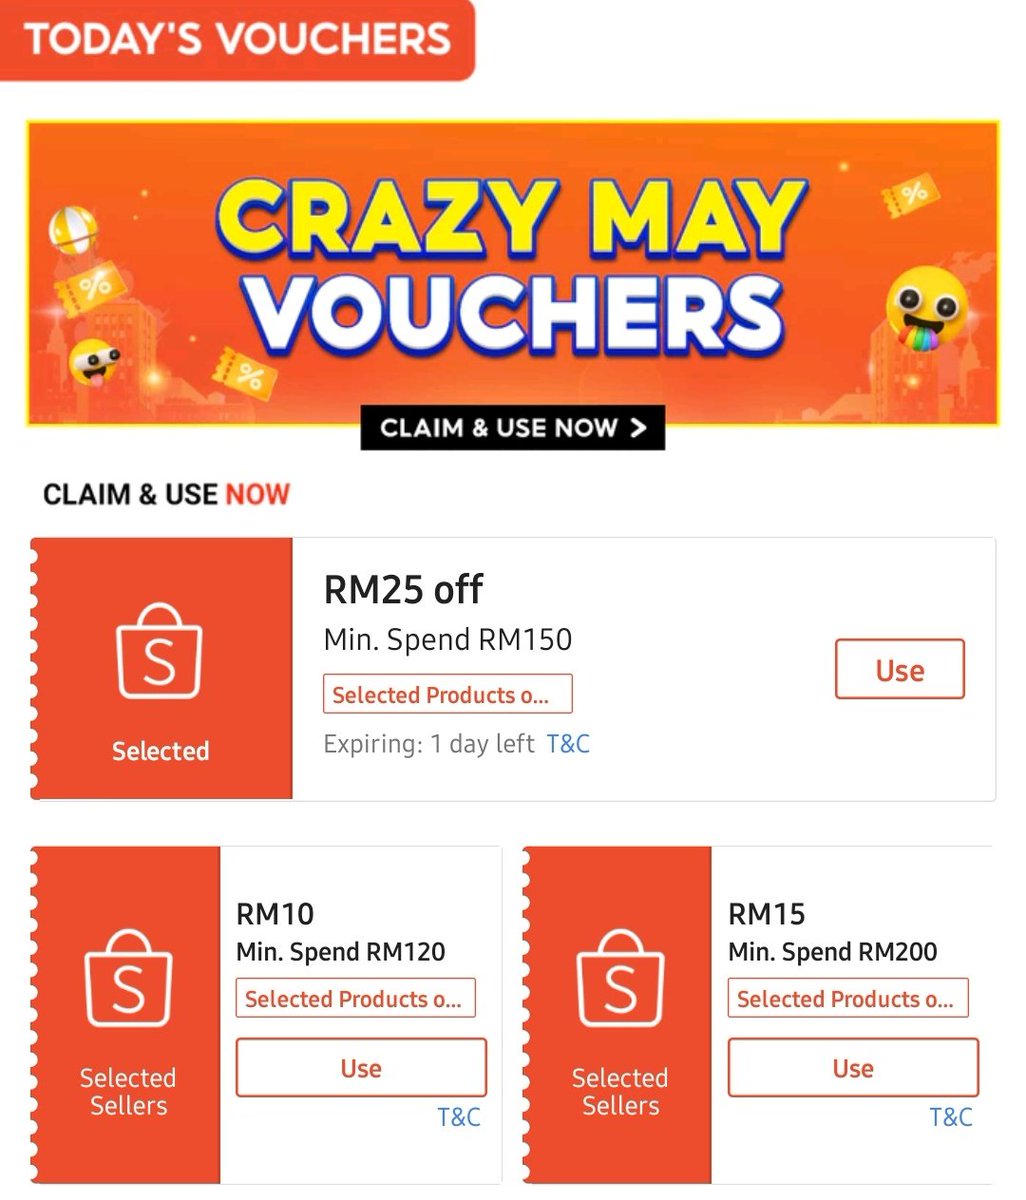 Crayzy May vouchers for youuuuu~~

🔗 s.shopee.com.my/4ptbPKILI6